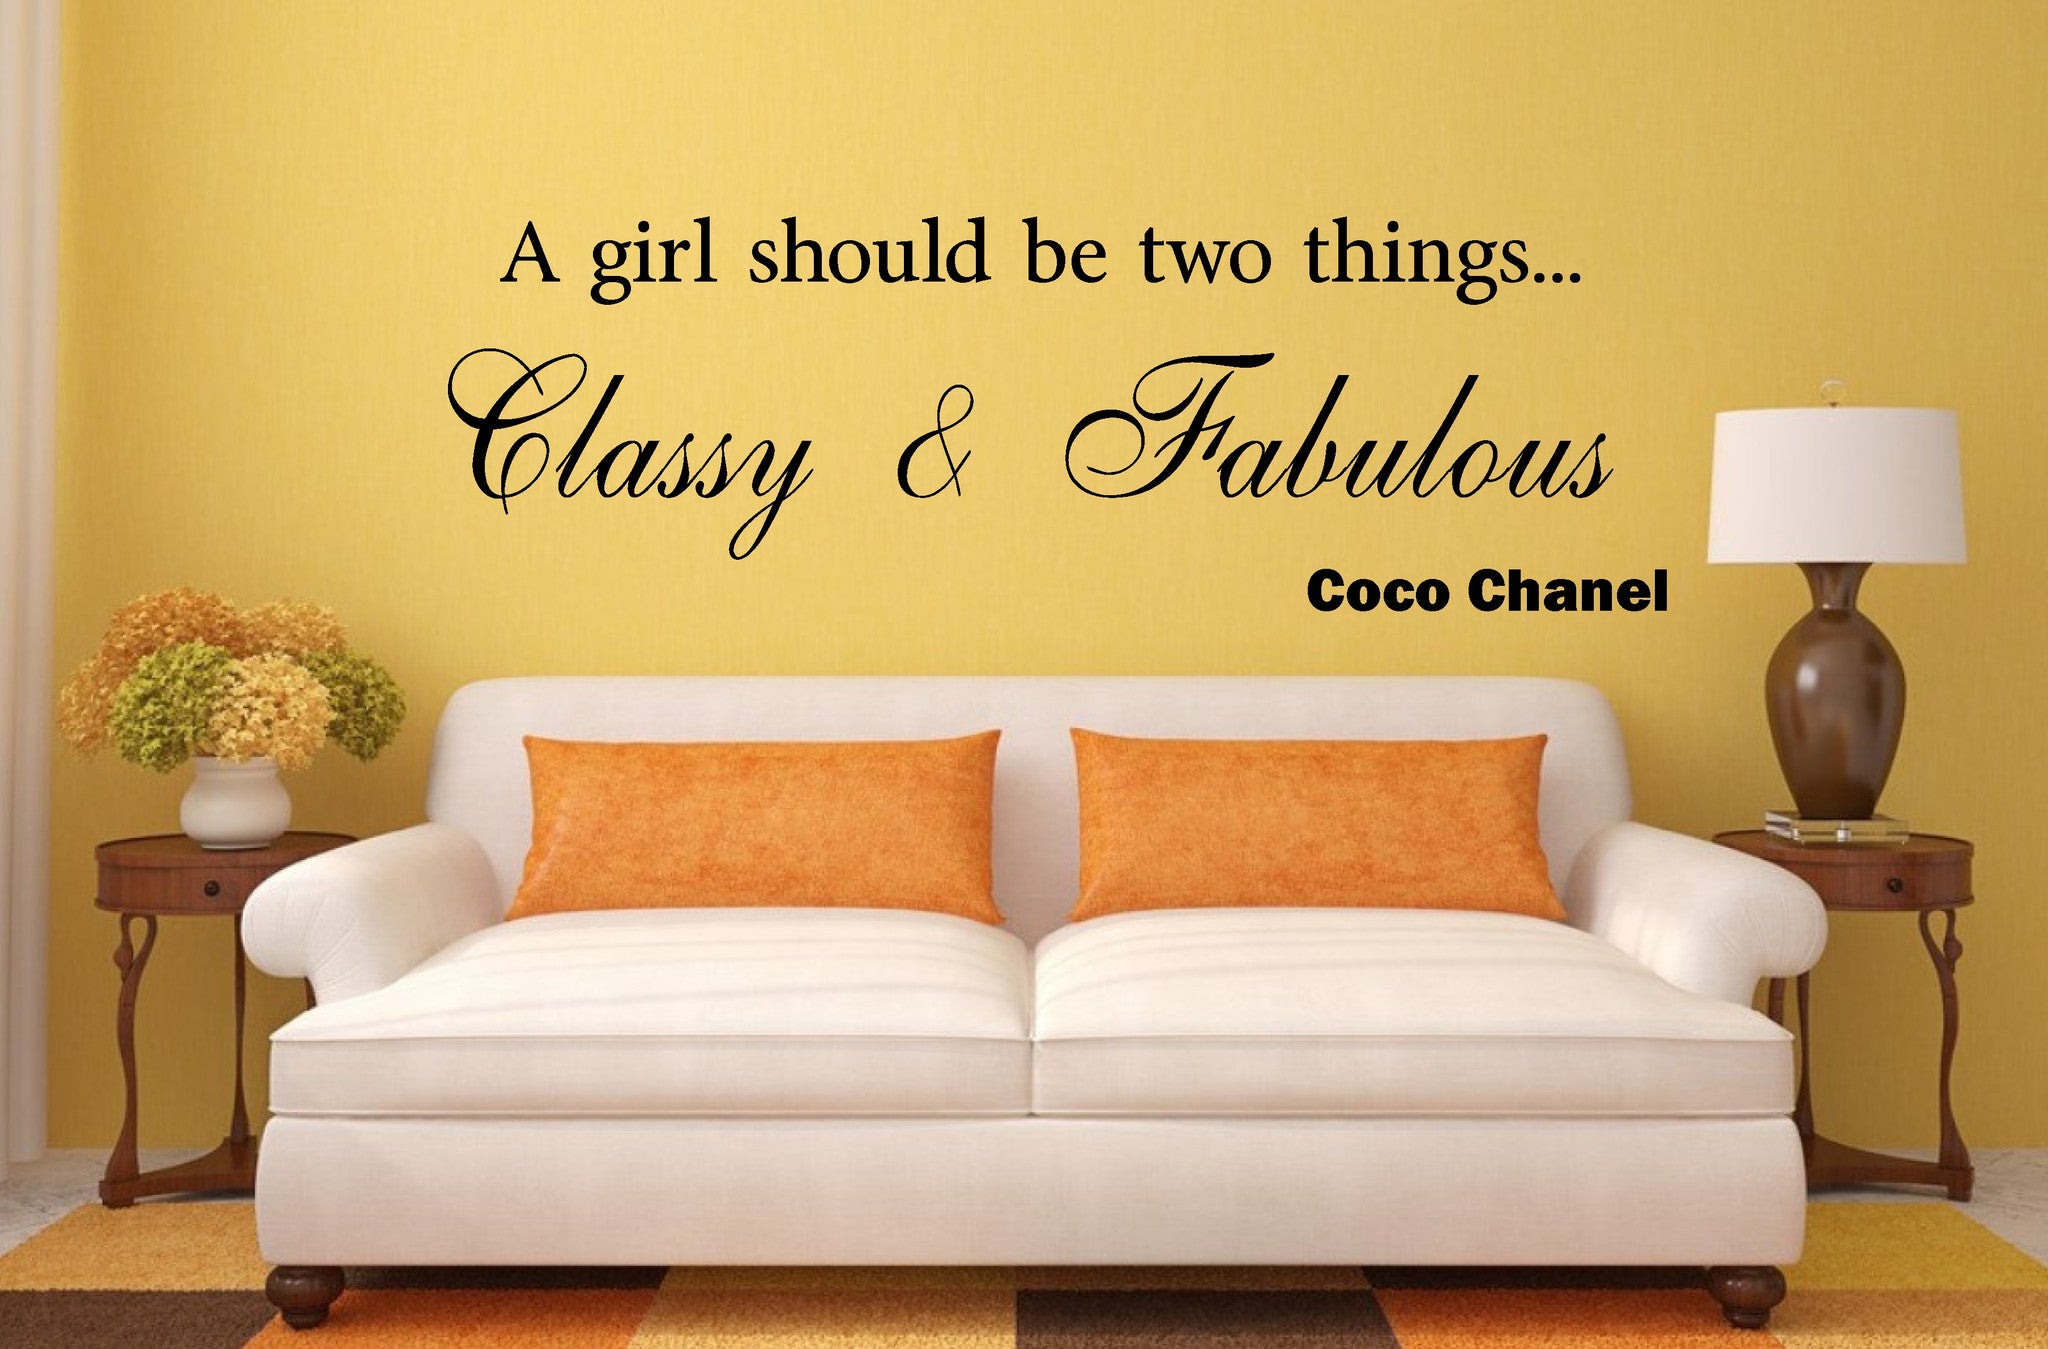 A girl should be two things, Coco Chanel quotes, Typography wall art,  Classy and fabulous, Glam decor, Typography print - Wall Art, Hanging Wall  Decor, Home Decor - BestOfBharat